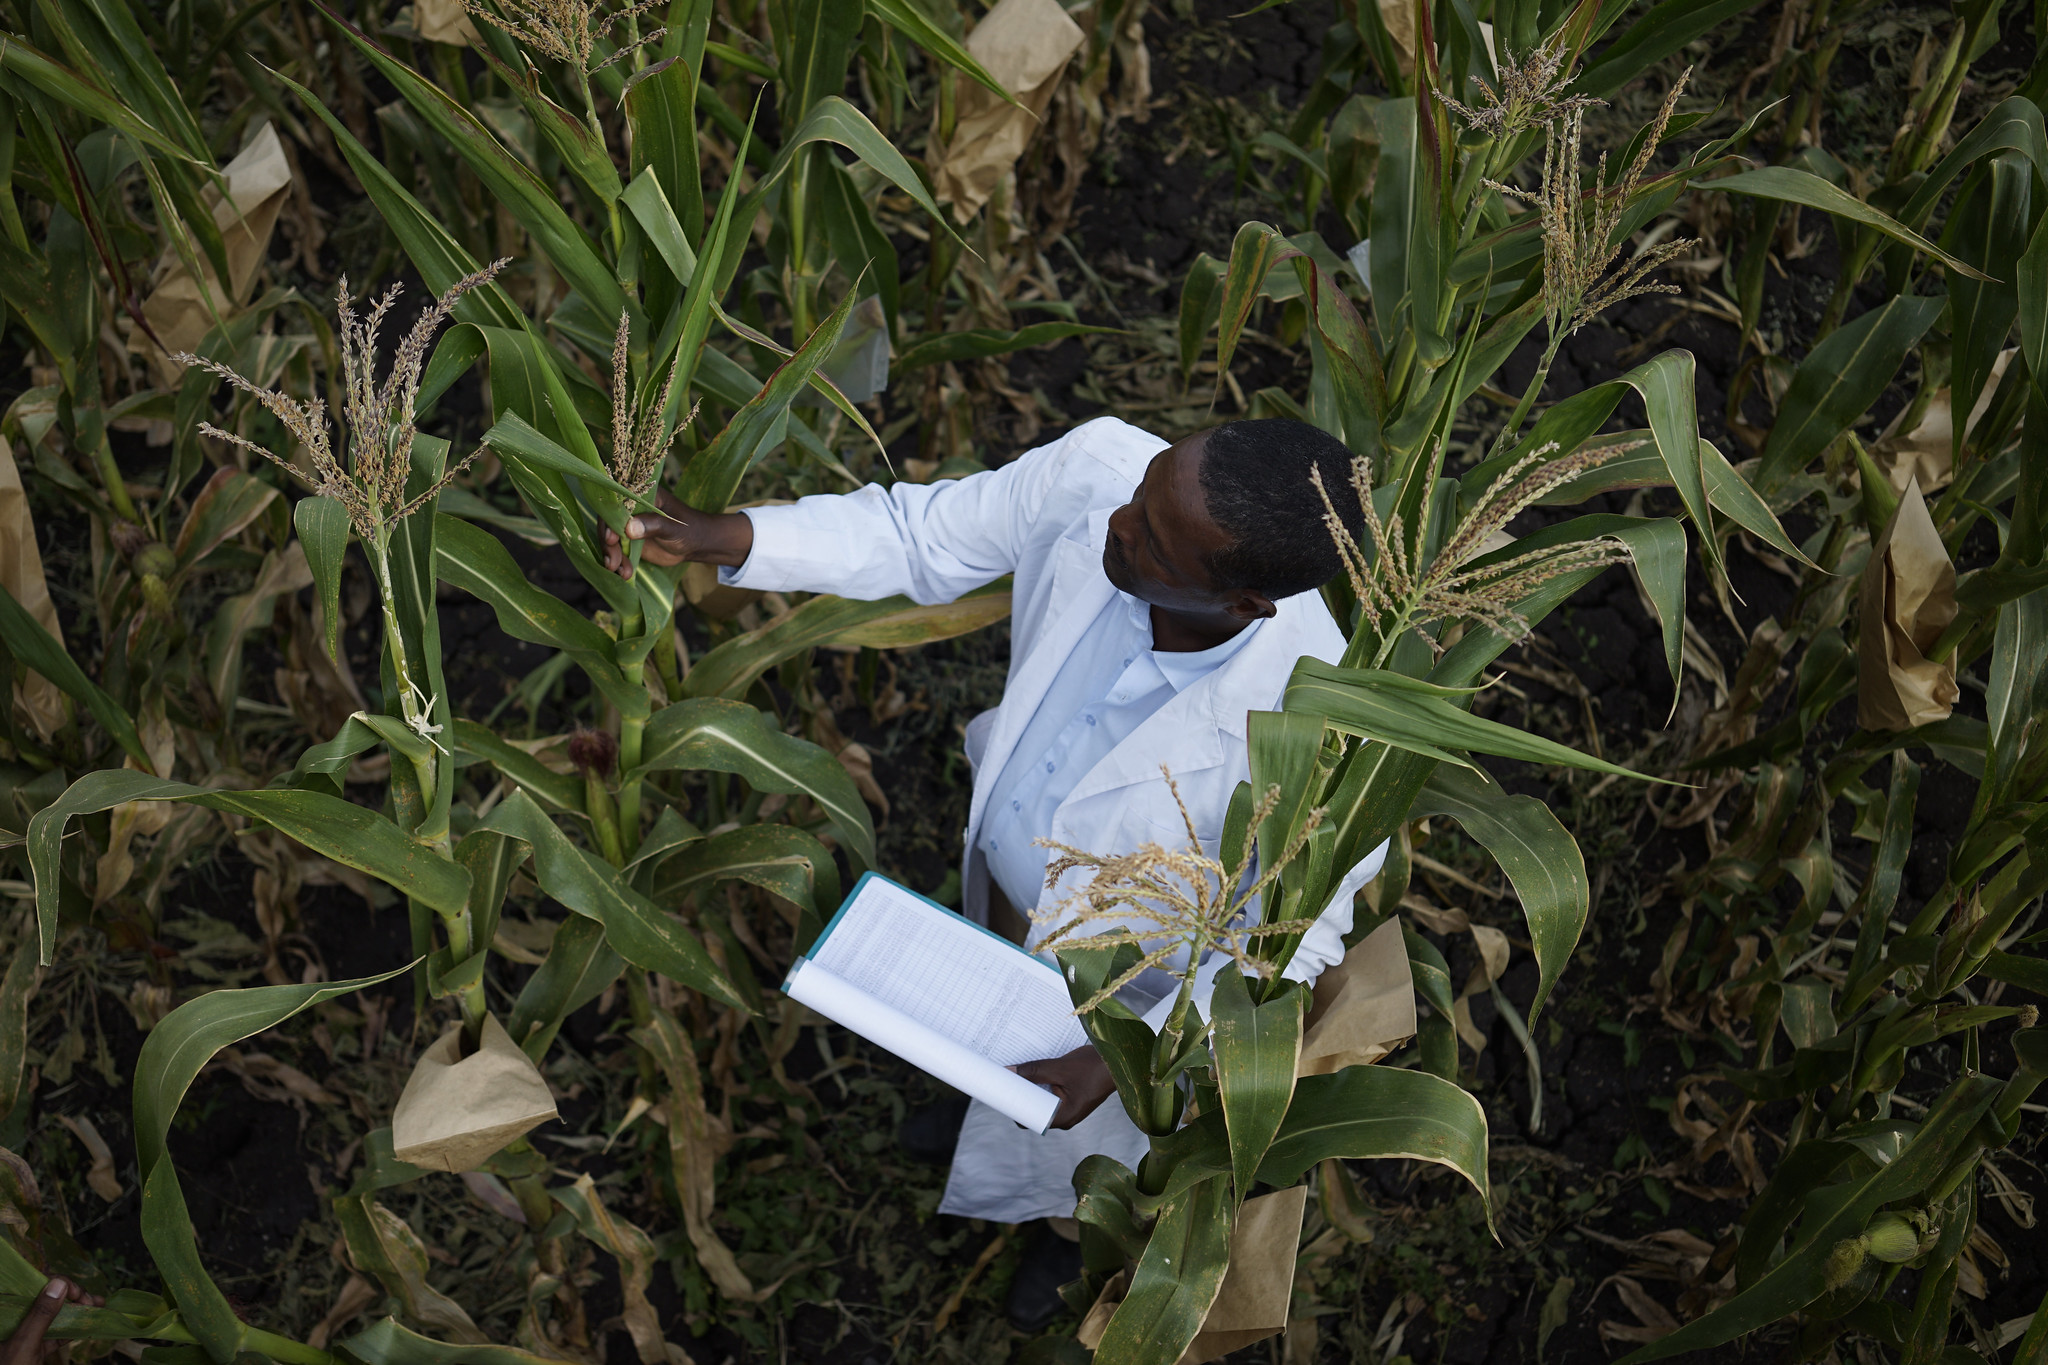 CIMMYT researcher Demewoz Negera at the Ambo Research Center in Ethiopia. (Photo: Peter Lowe/CIMMYT)